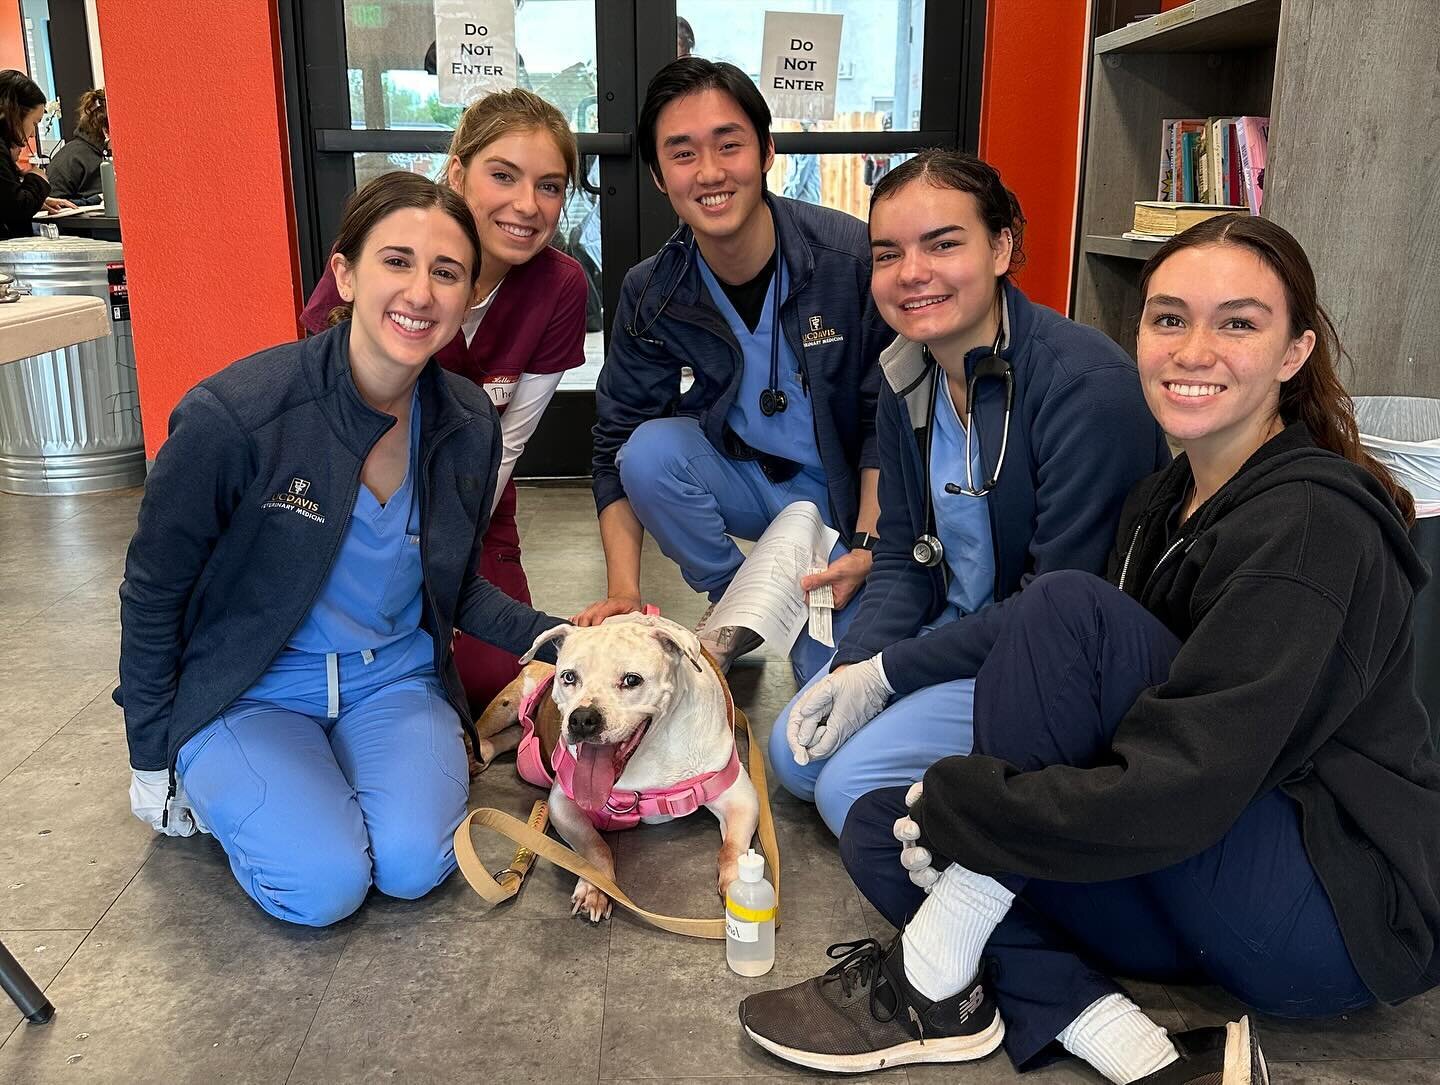 Here&rsquo;s a sneak peak into our clinic yesterday! A big thanks to all our clients and volunteers who make it all happen. Swipe left to catch a glimpse of some of our adorable patients and amazing volunteers. Mark your calendars &ndash; our next cl